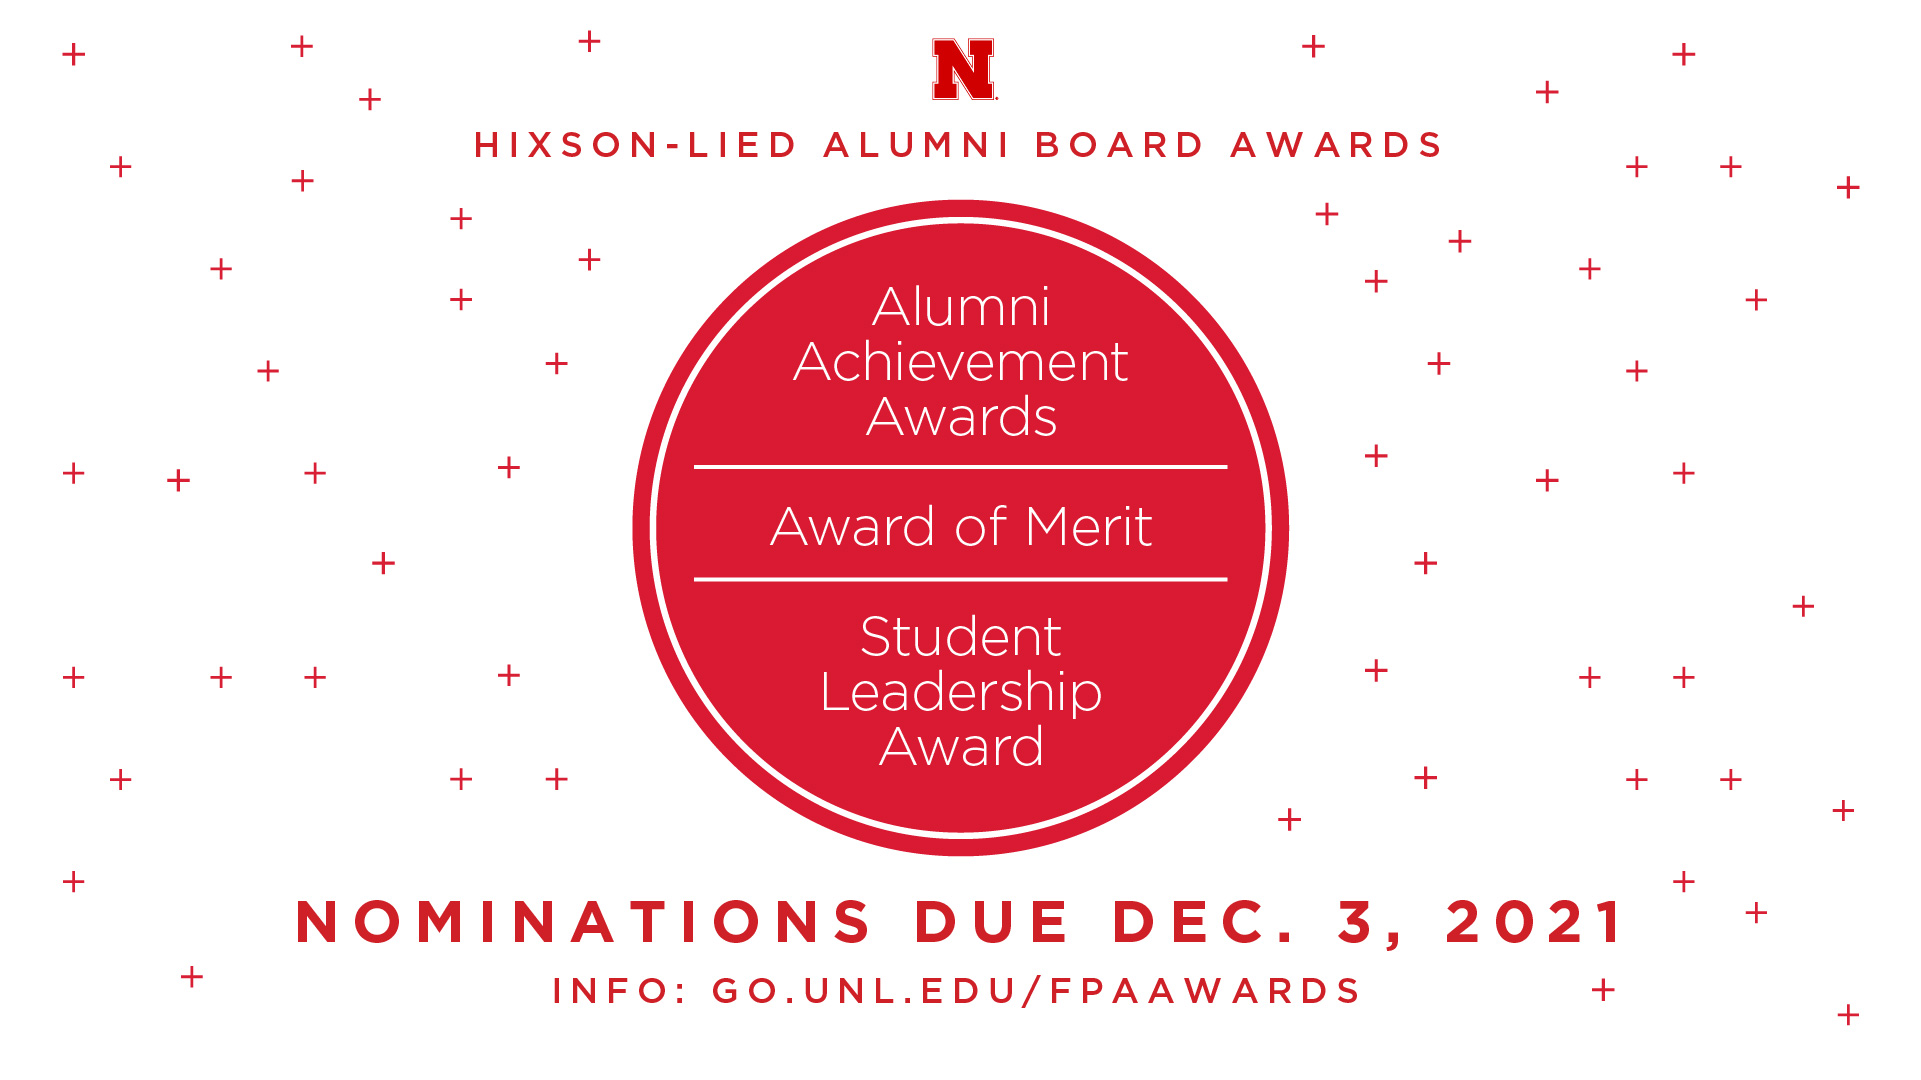 Nominations for the Alumni Achievement Awards, Award of Merit and Student Leadership Award are due Dec. 3.